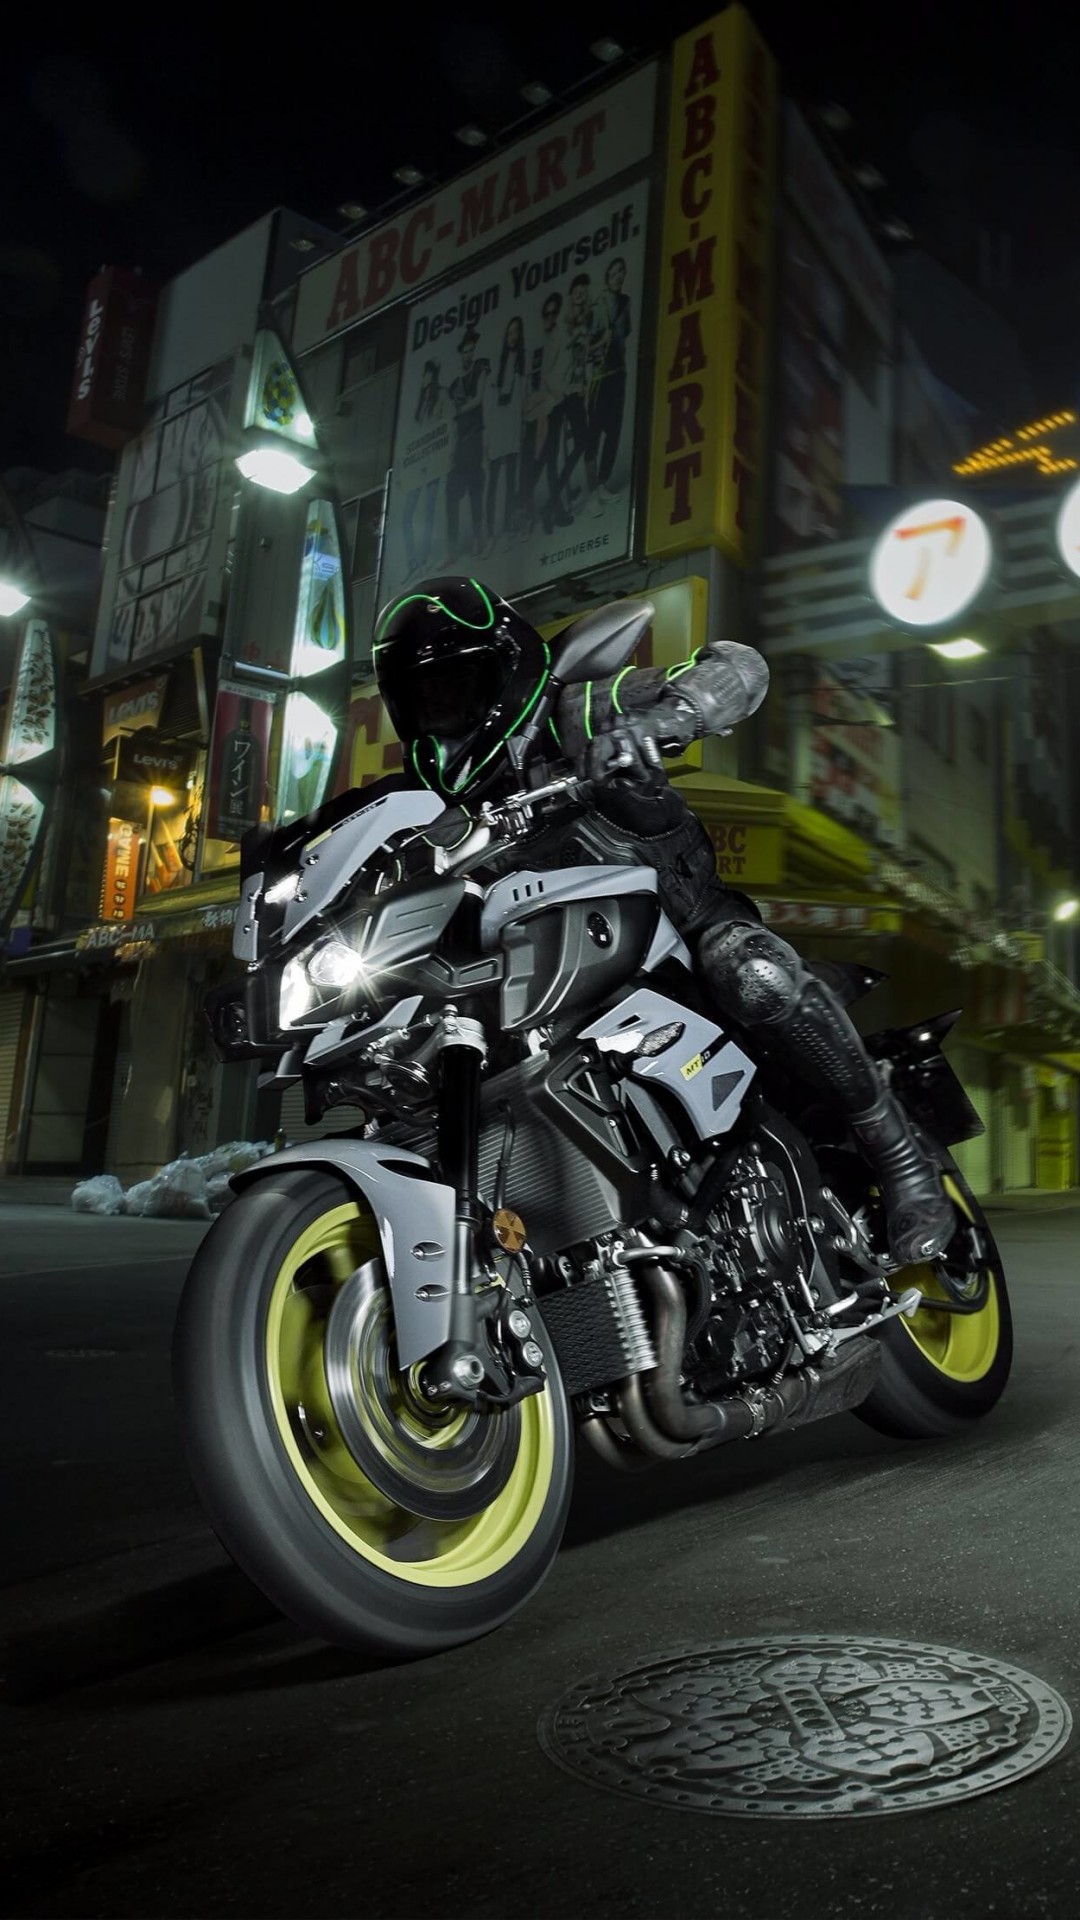 Yamaha MT-10 Superbike Wallpaper for SONY Xperia Z3